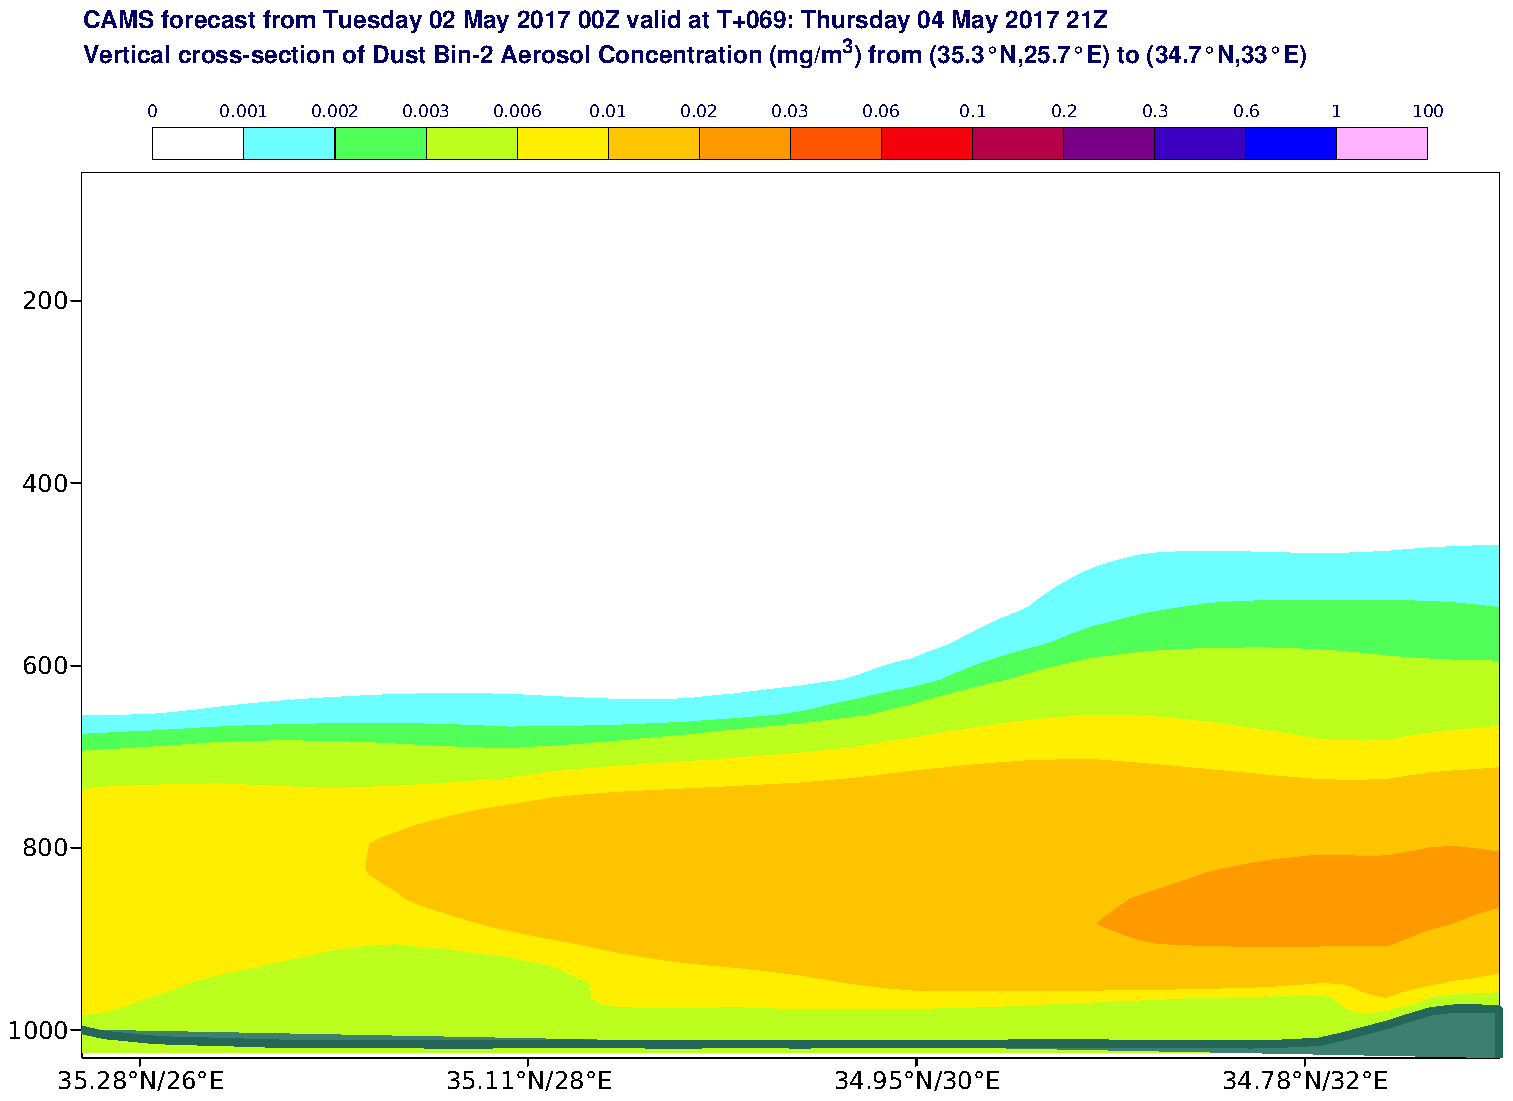 Vertical cross-section of Dust Bin-2 Aerosol Concentration (mg/m3) valid at T69 - 2017-05-04 21:00